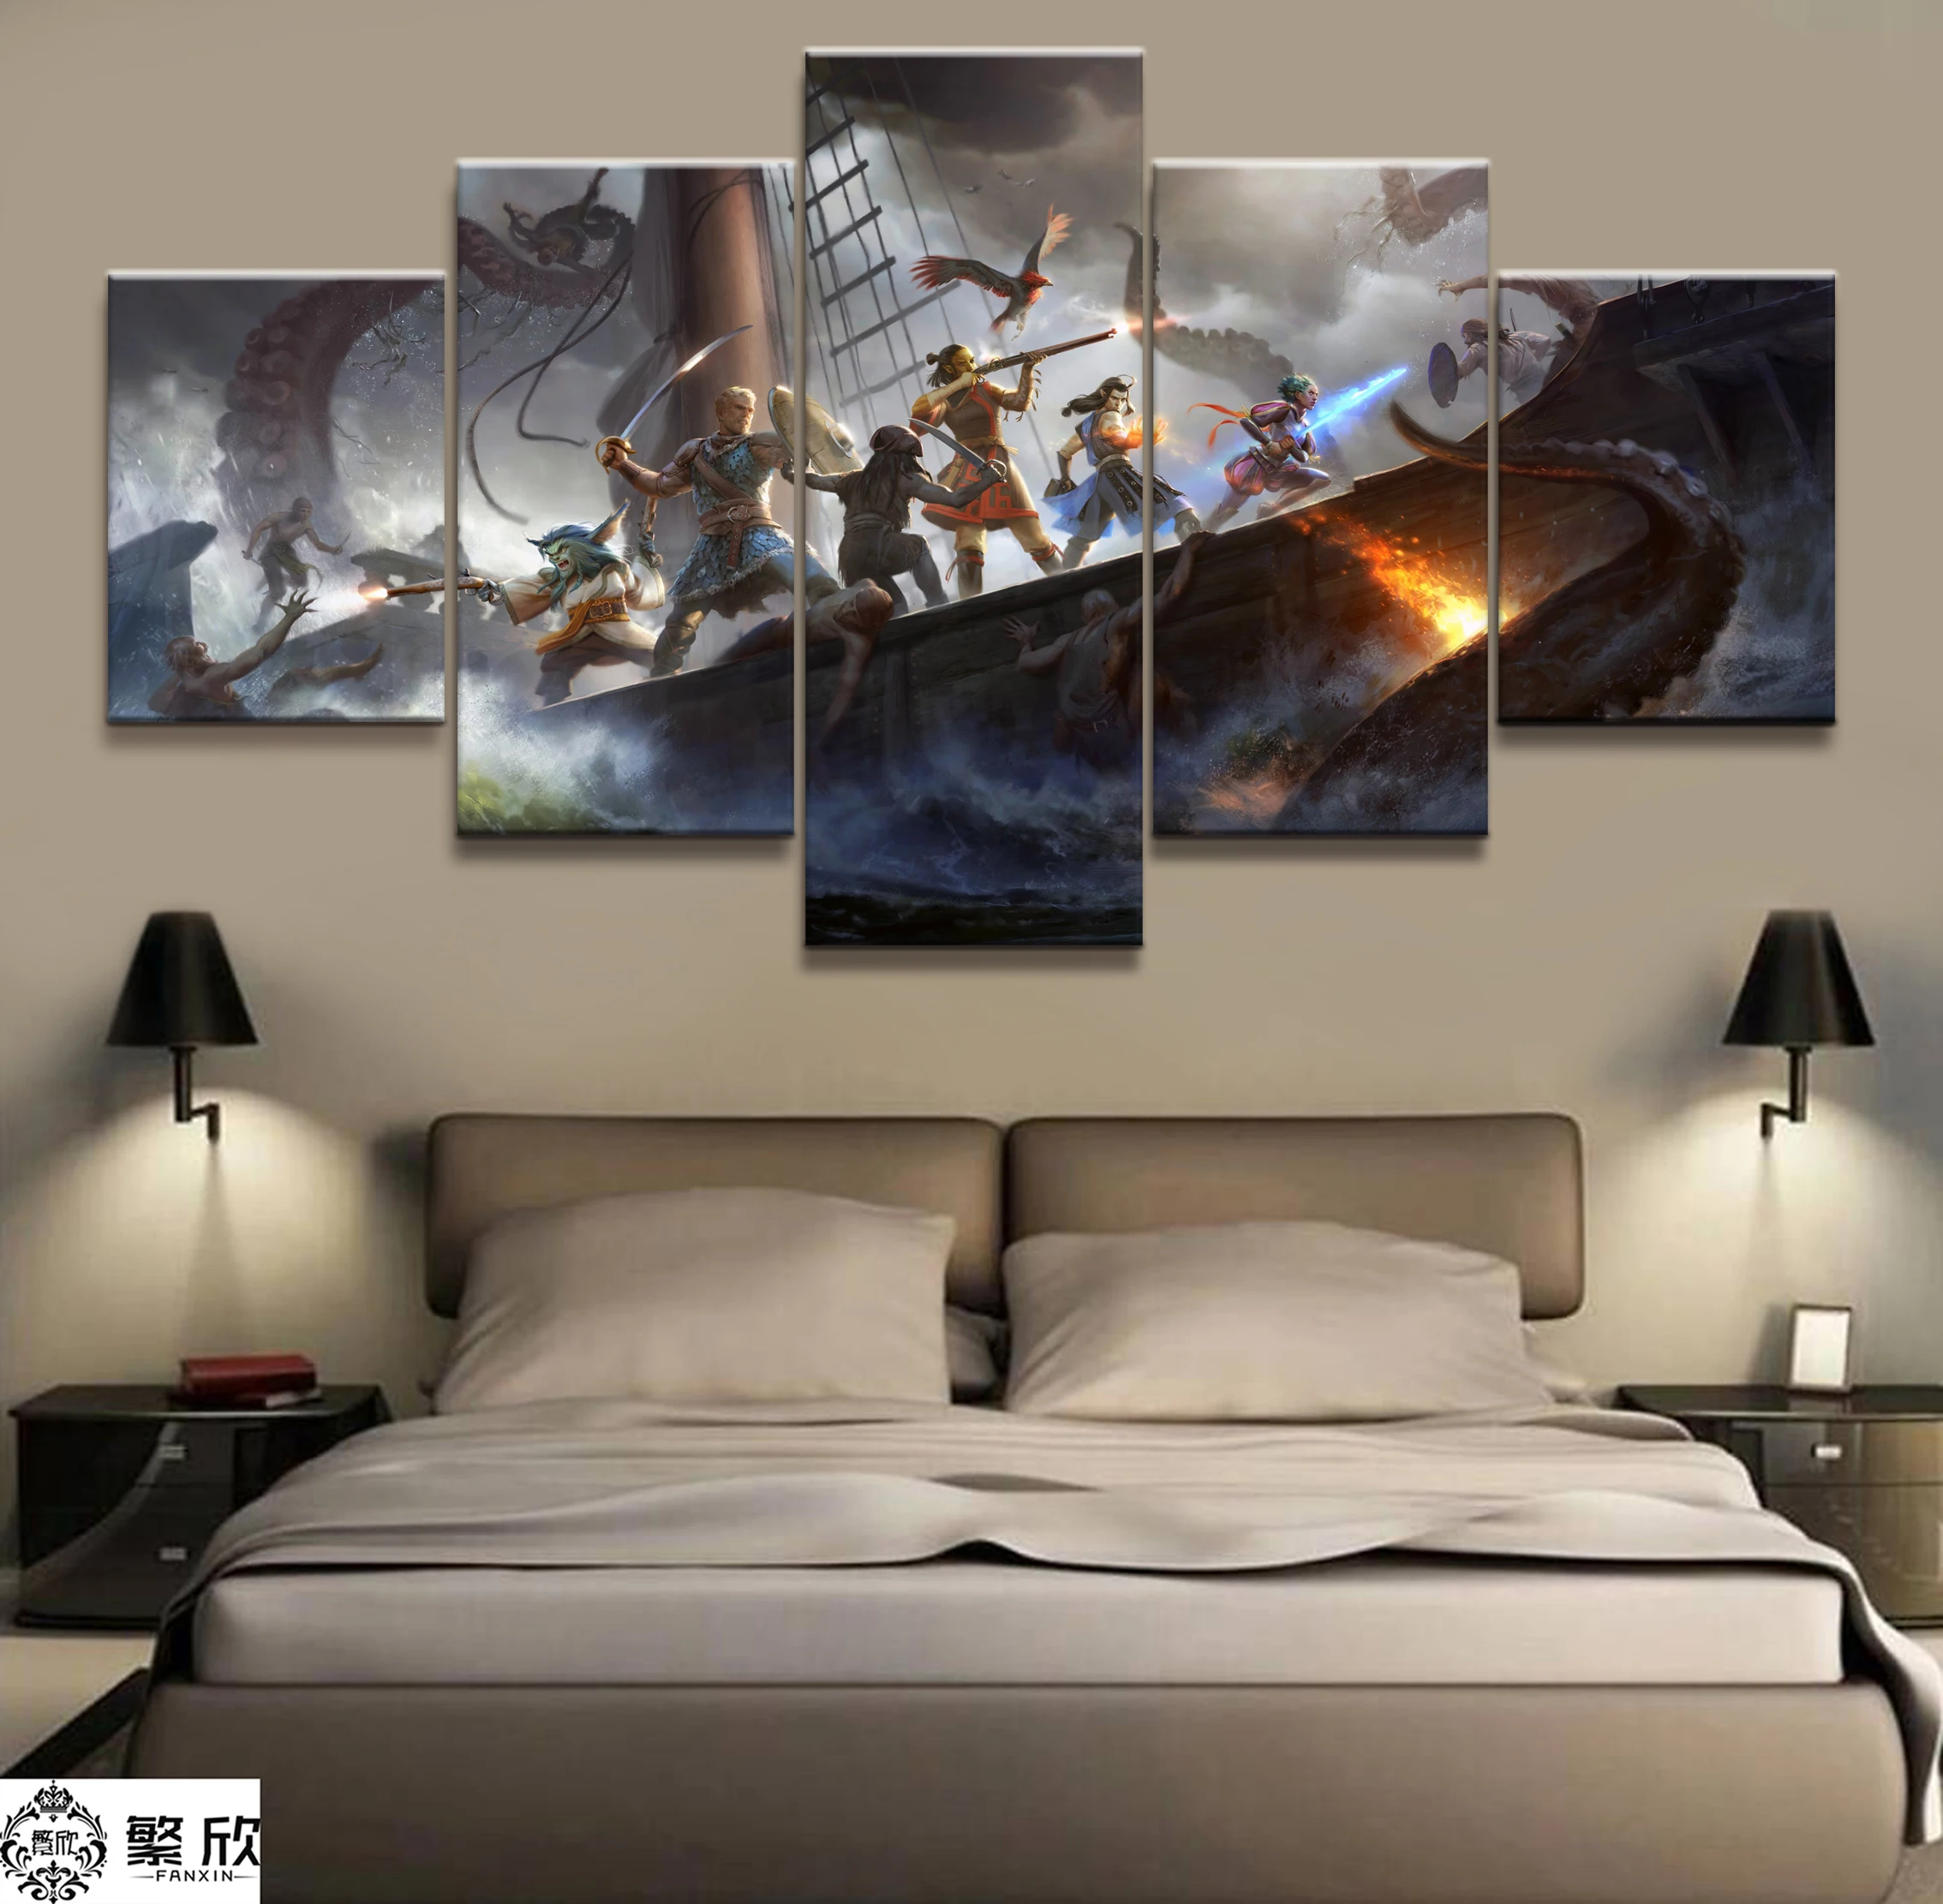 

5 Panel Pillars of Eternity Game Canvas Printed Painting Living Room Wall Art Decor Picture Artworks Poster Canvas Wholesale